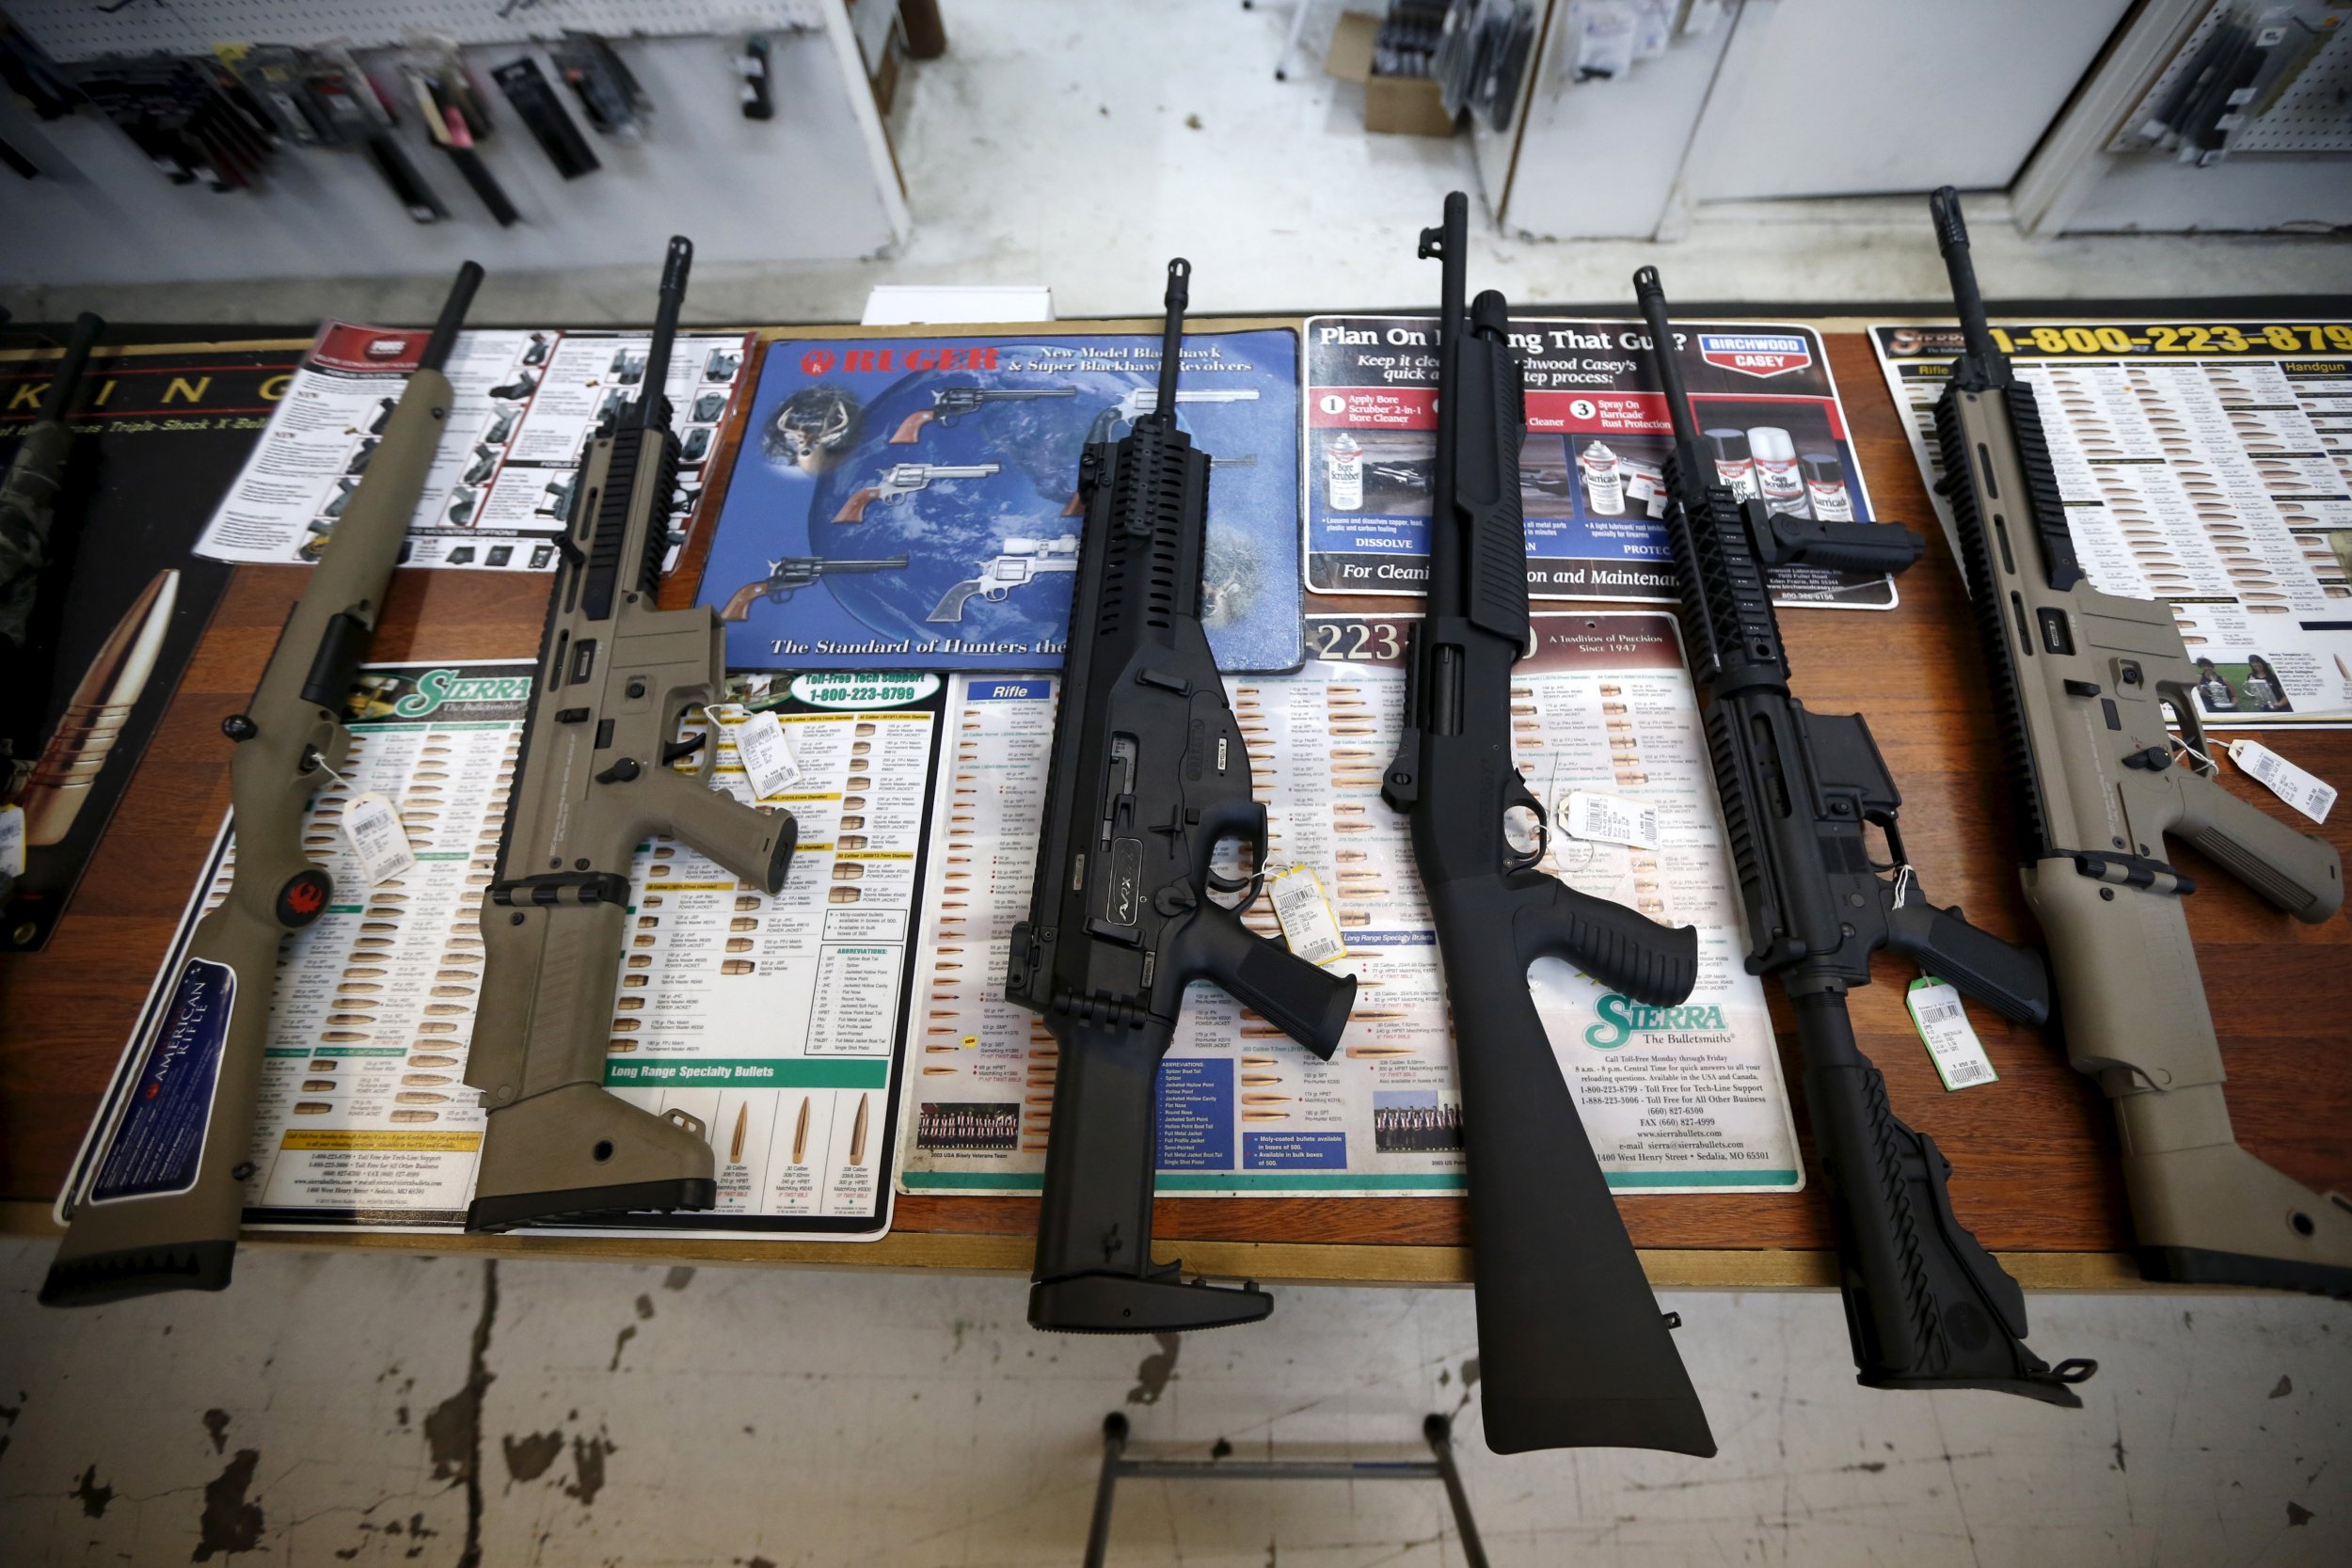 Gun Background Checks Hit Fifth Straight Monthly Record